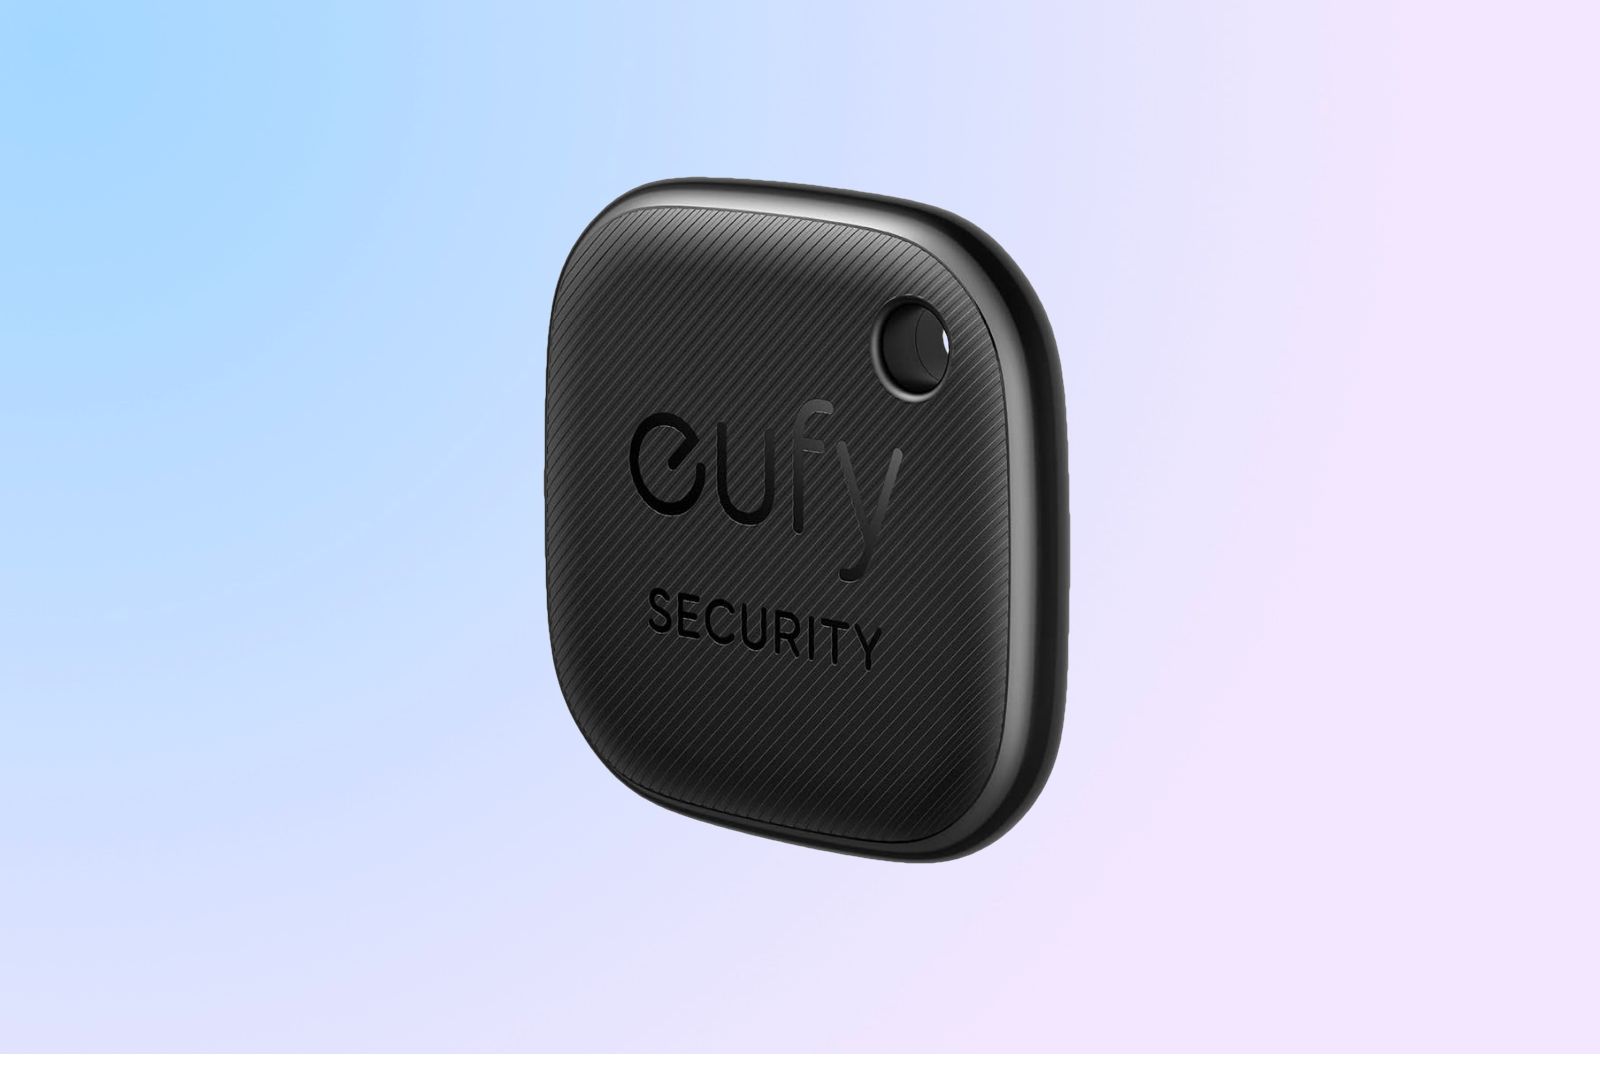 The Eufy Security SmartTrack Link angled so that it's logo and keyring hole are visible on a bluish-pink background.